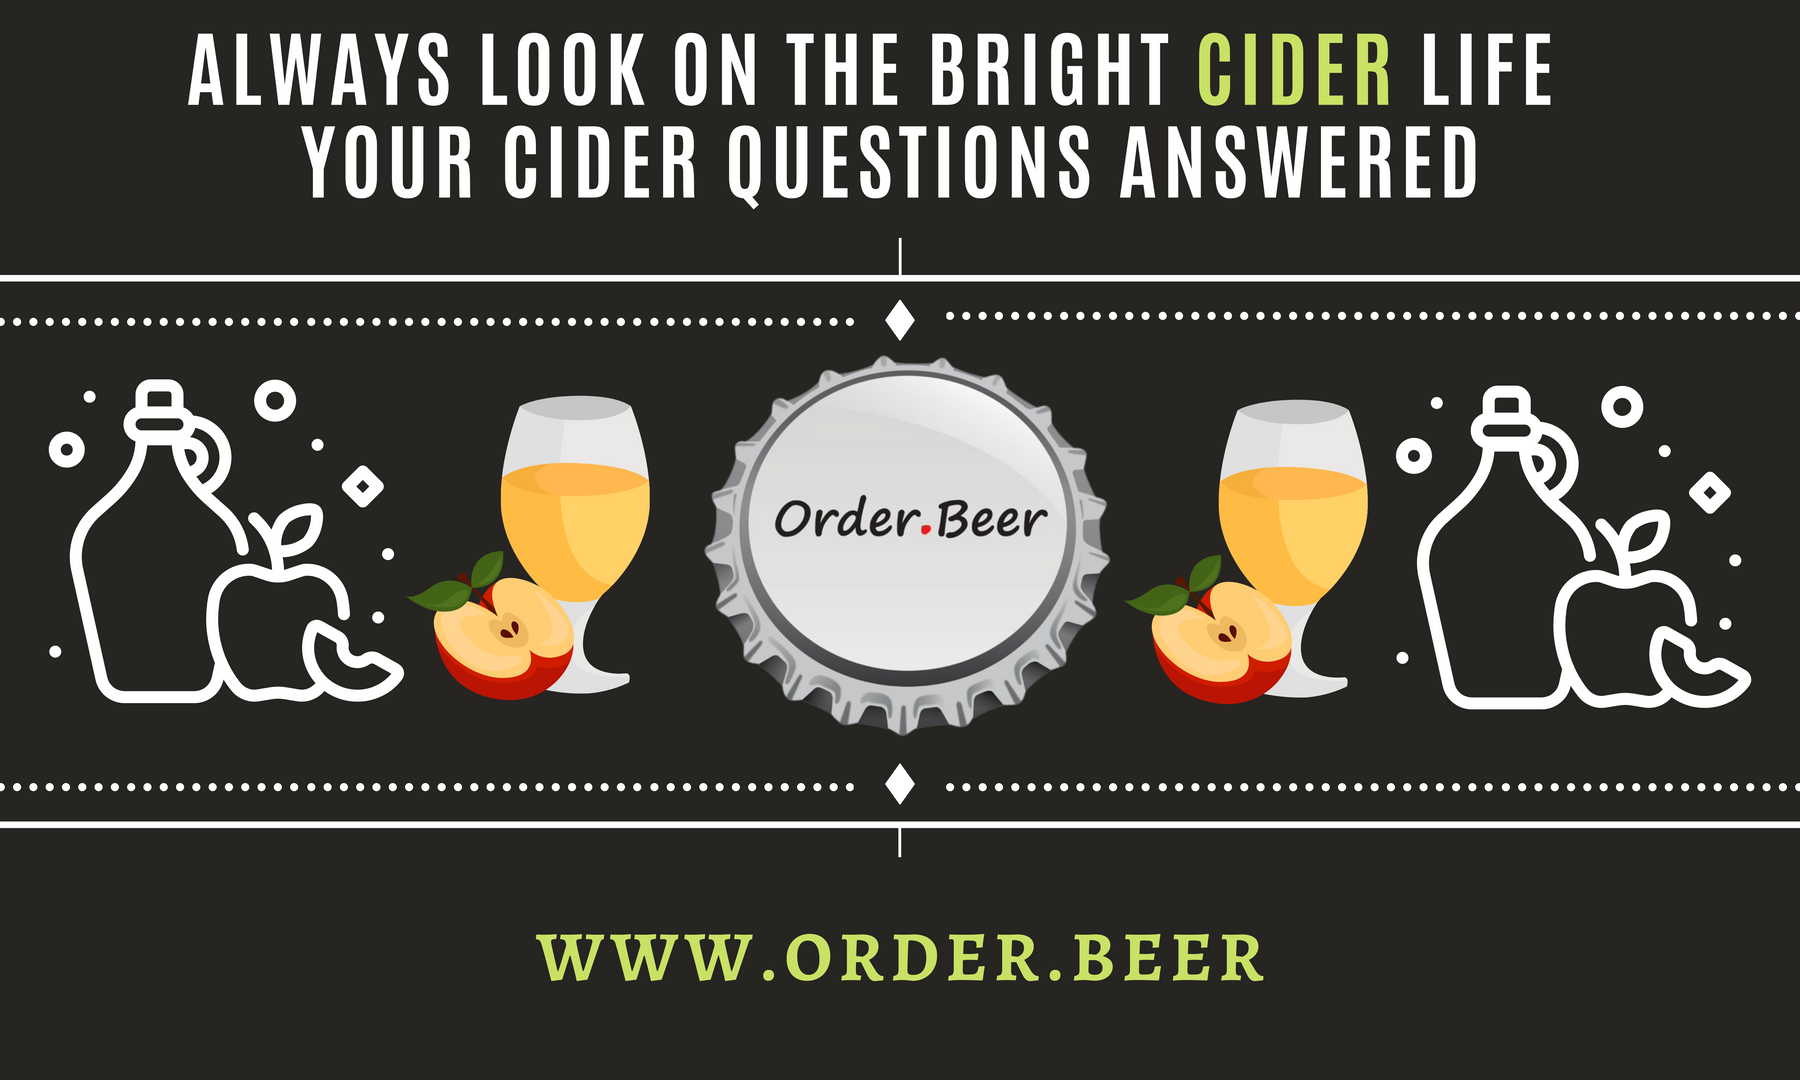 Always look on the bright CIDER life - Your Cider Questions Answered